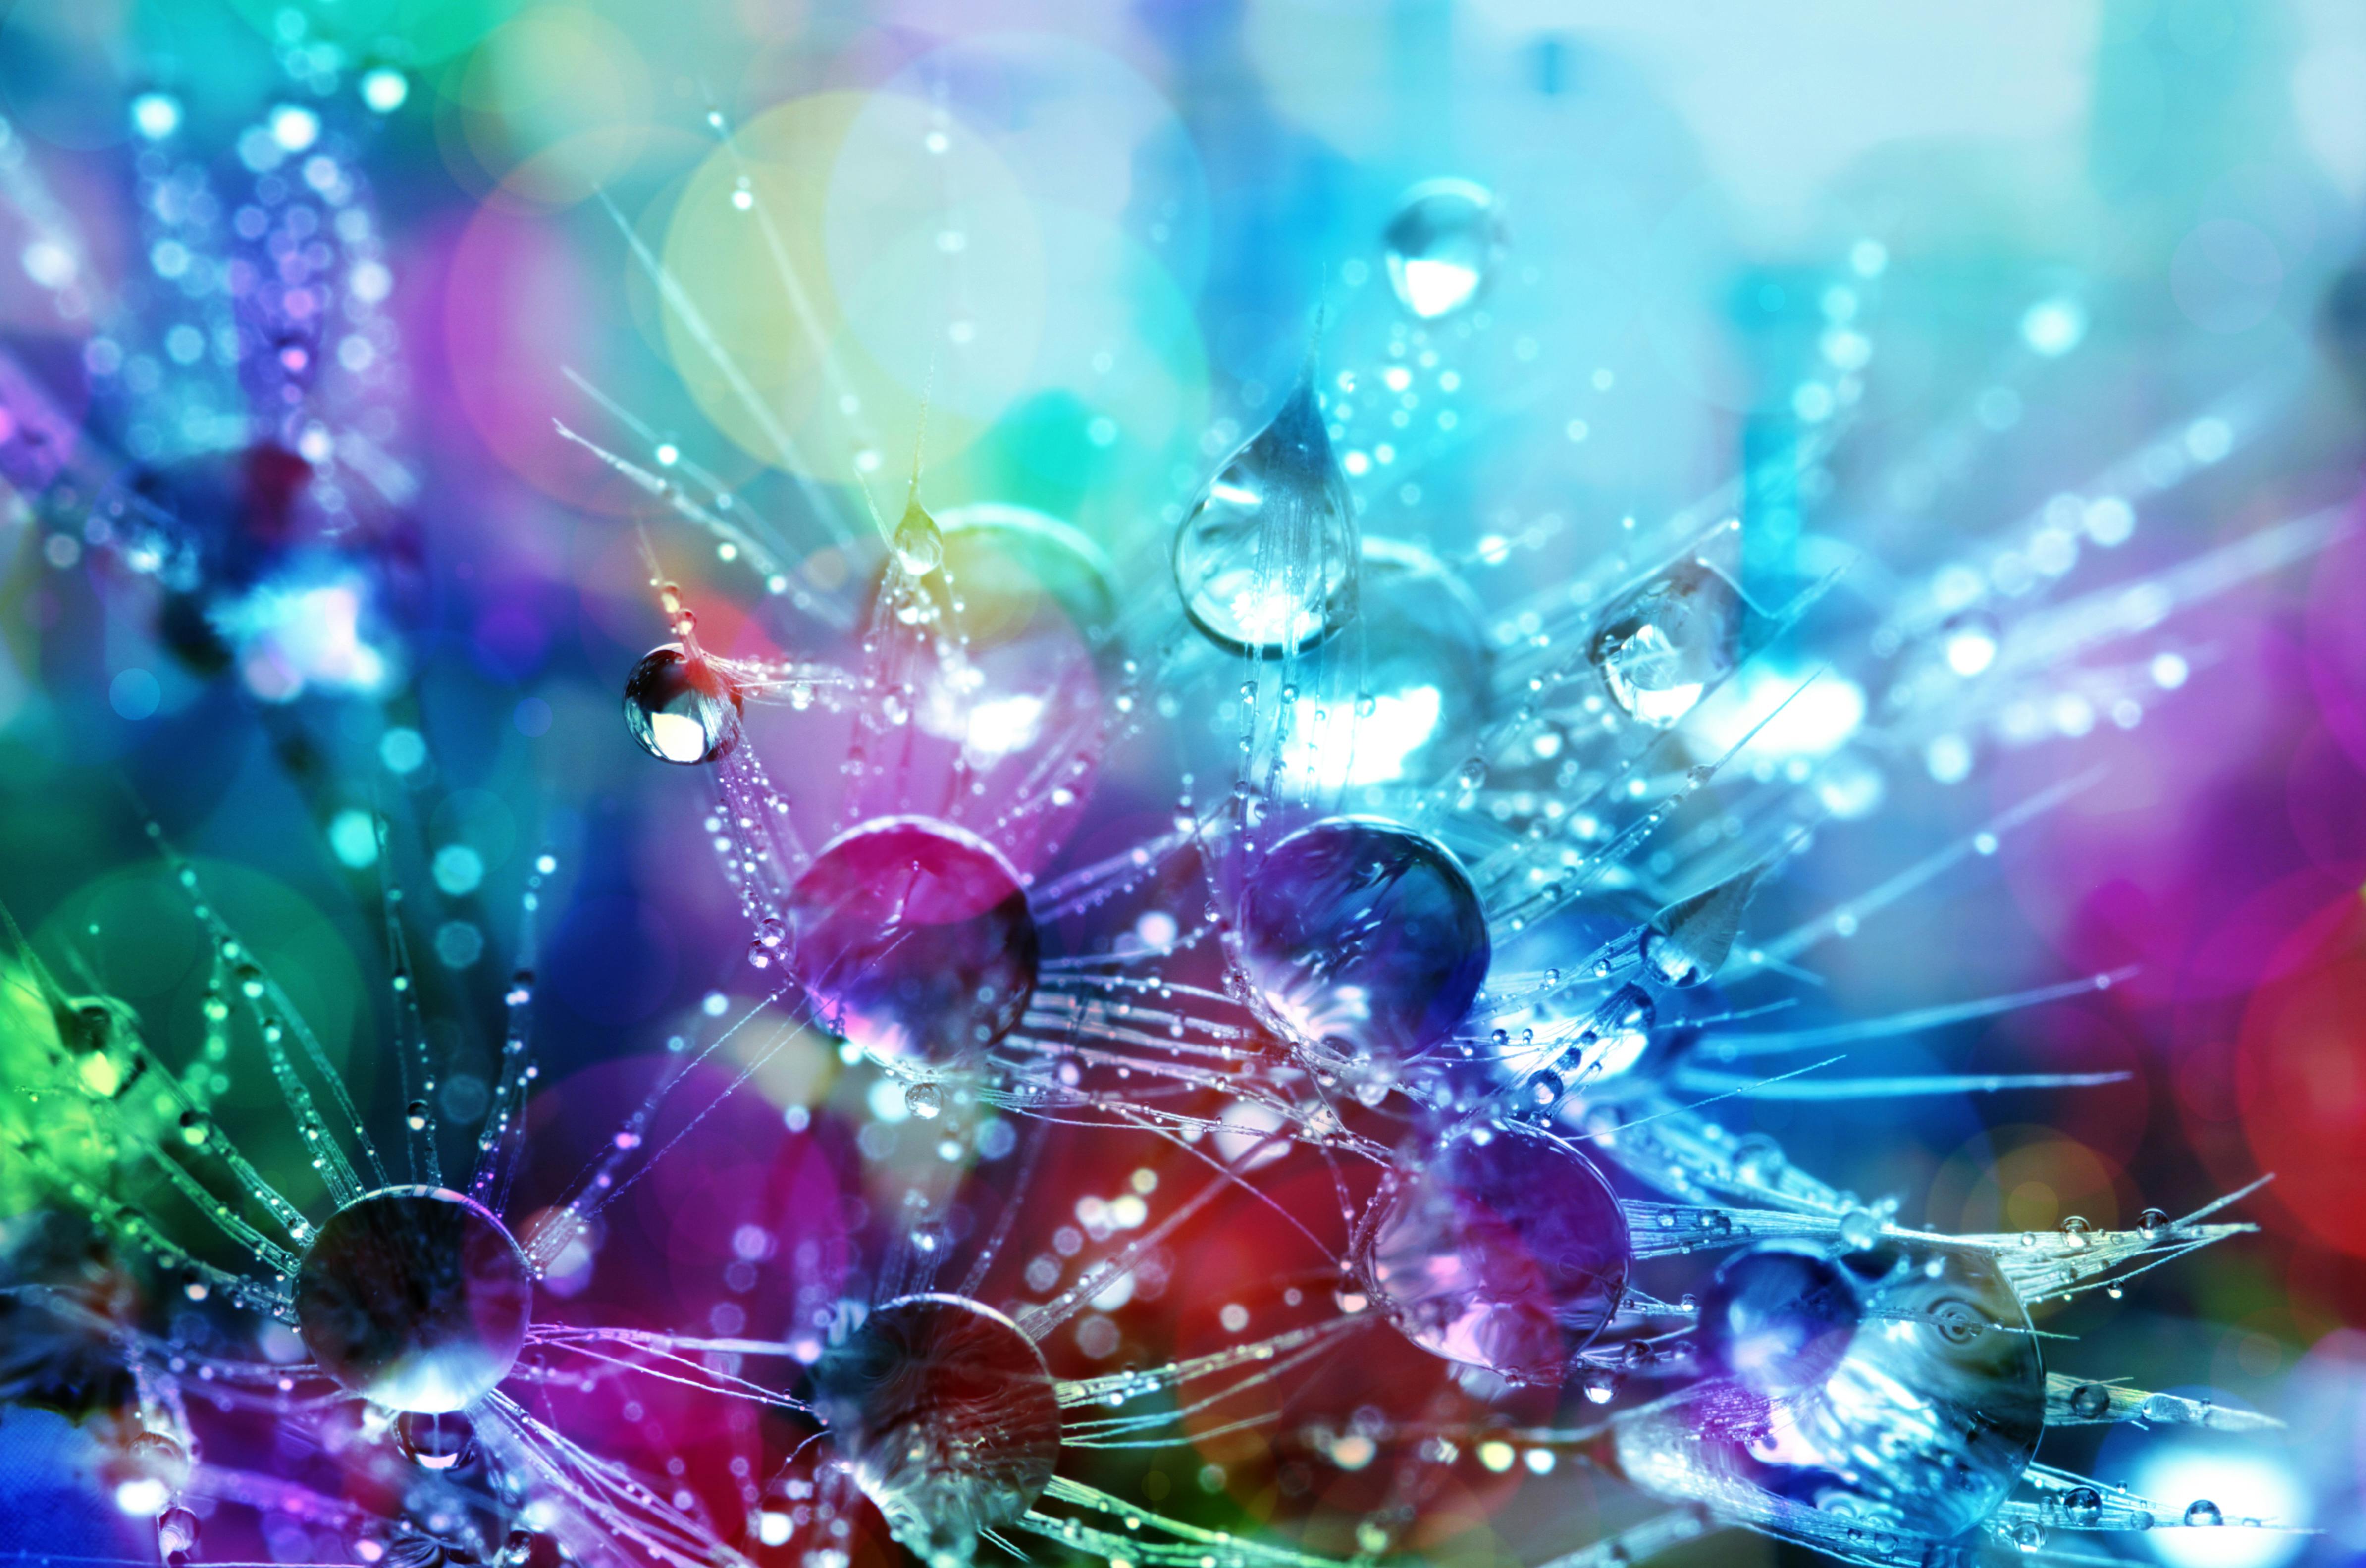 Petaled Flowers With Dew Drops on Close Up Photography \u00b7 Free Stock Photo